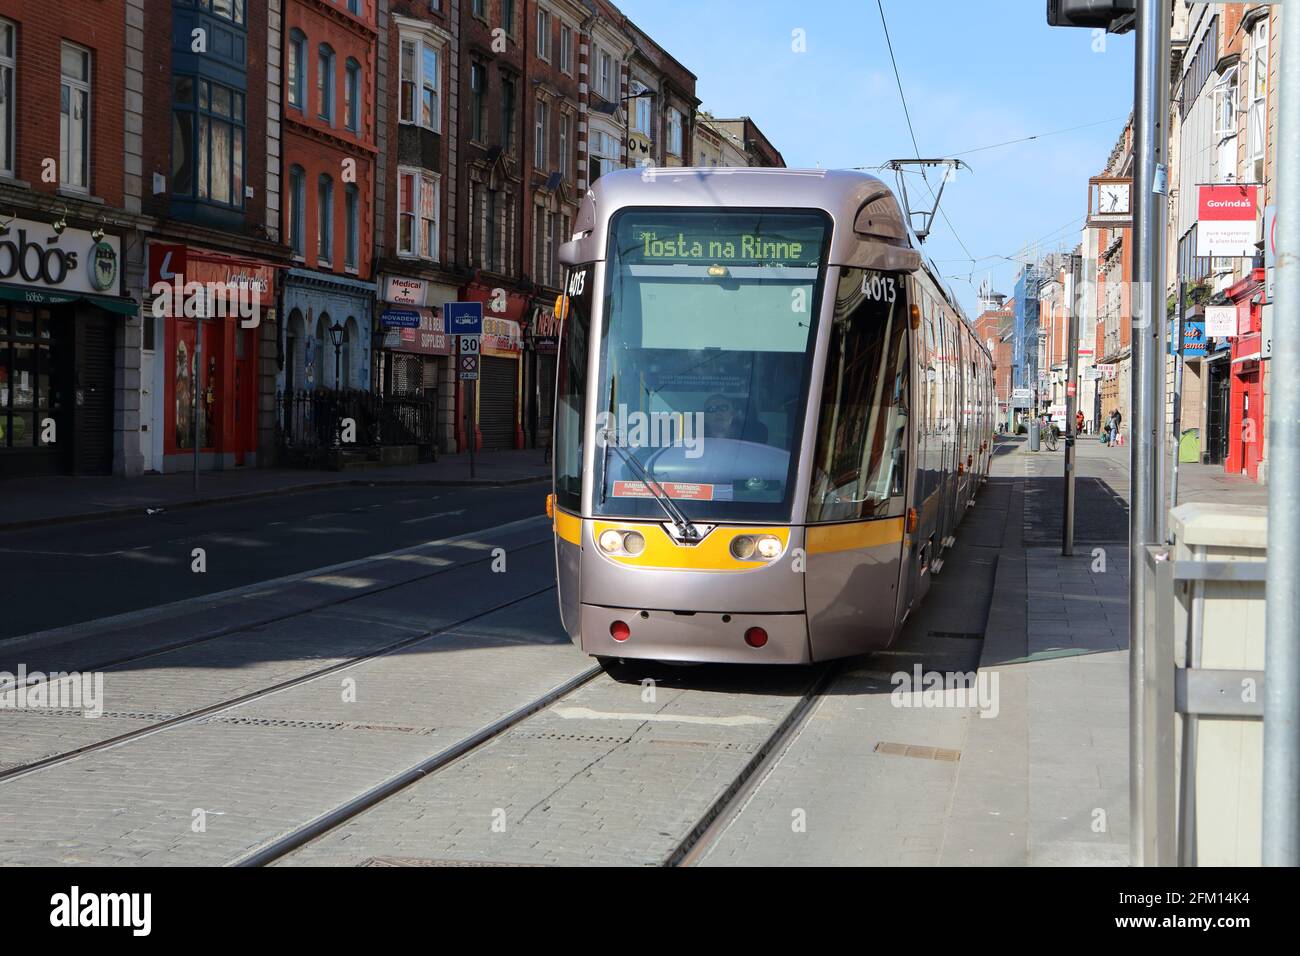 Luas (Tram) on the streets of Dublin Stock Photo